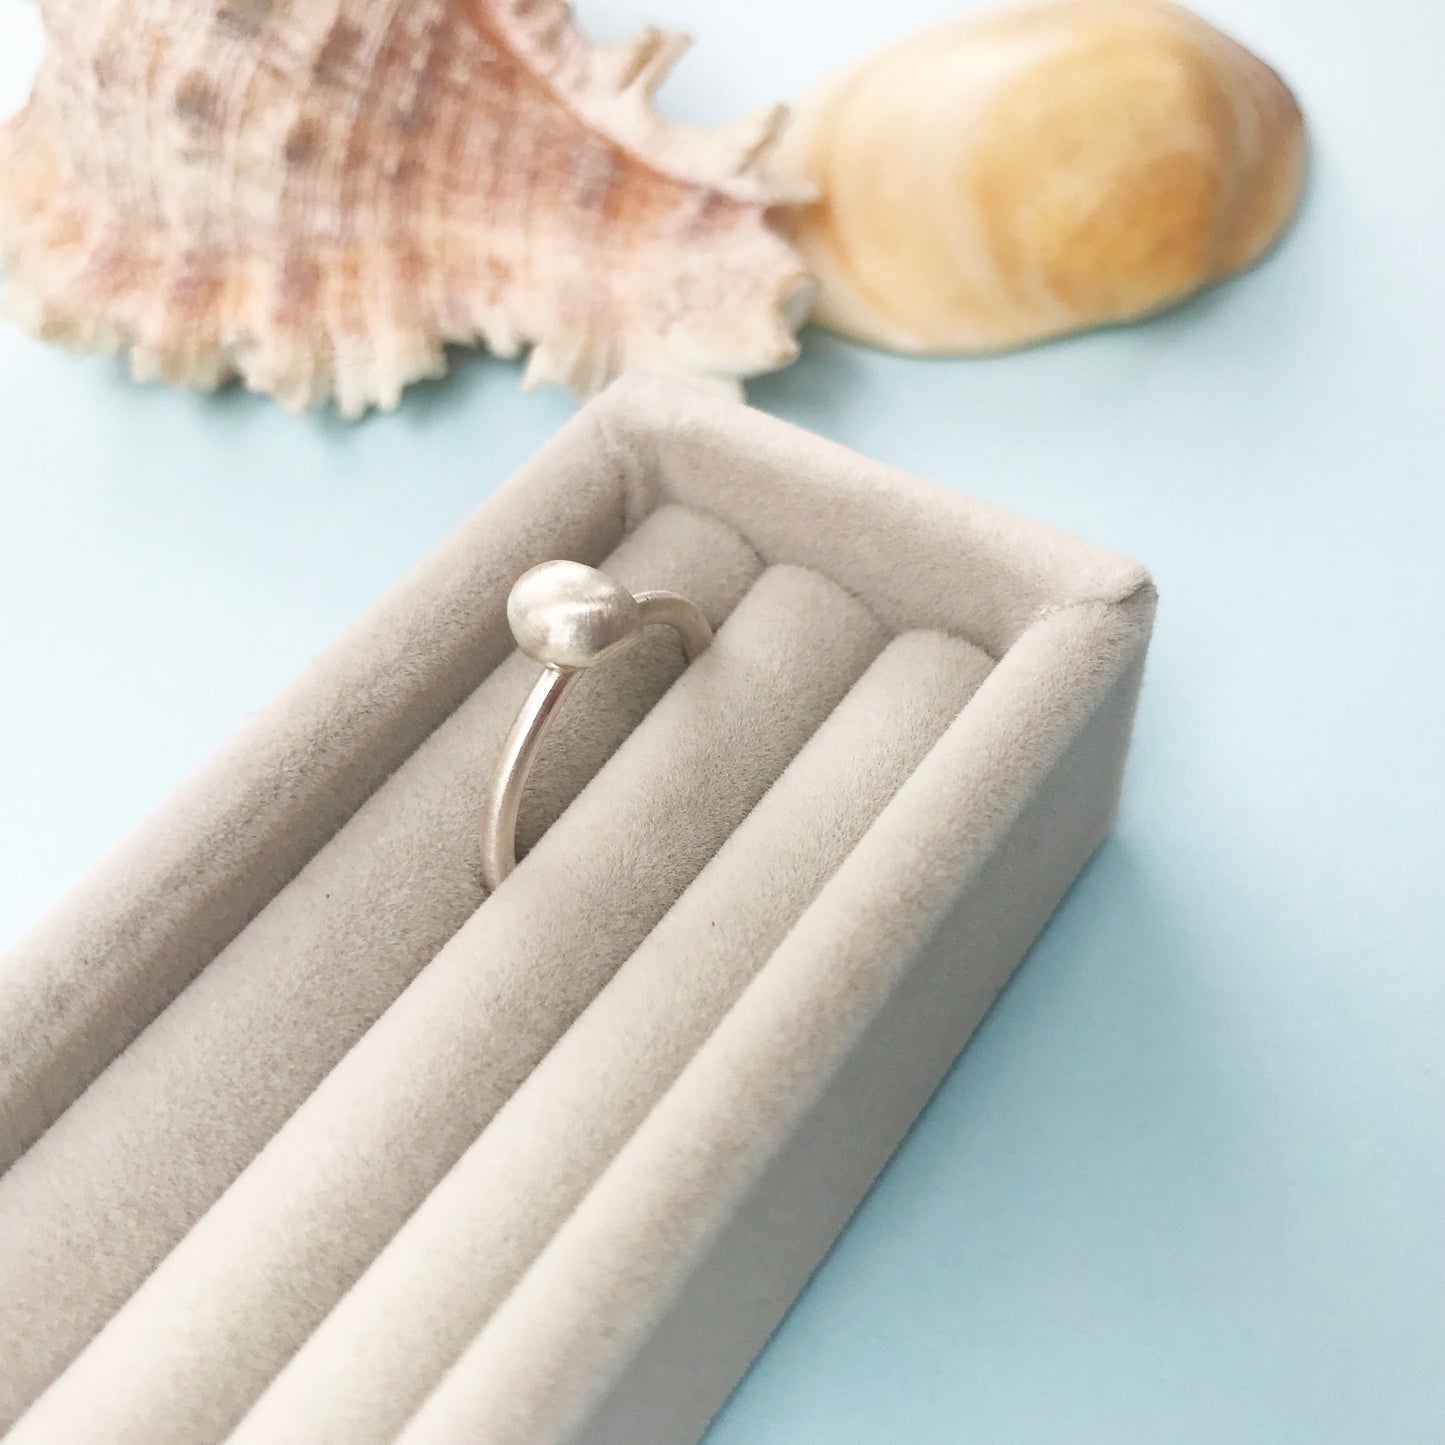 sterling silver pebble stacking rings, silver stacking rings, silver pebble rings, silver stacking pebble rings, polished pebble ring, matte silver pebble ring